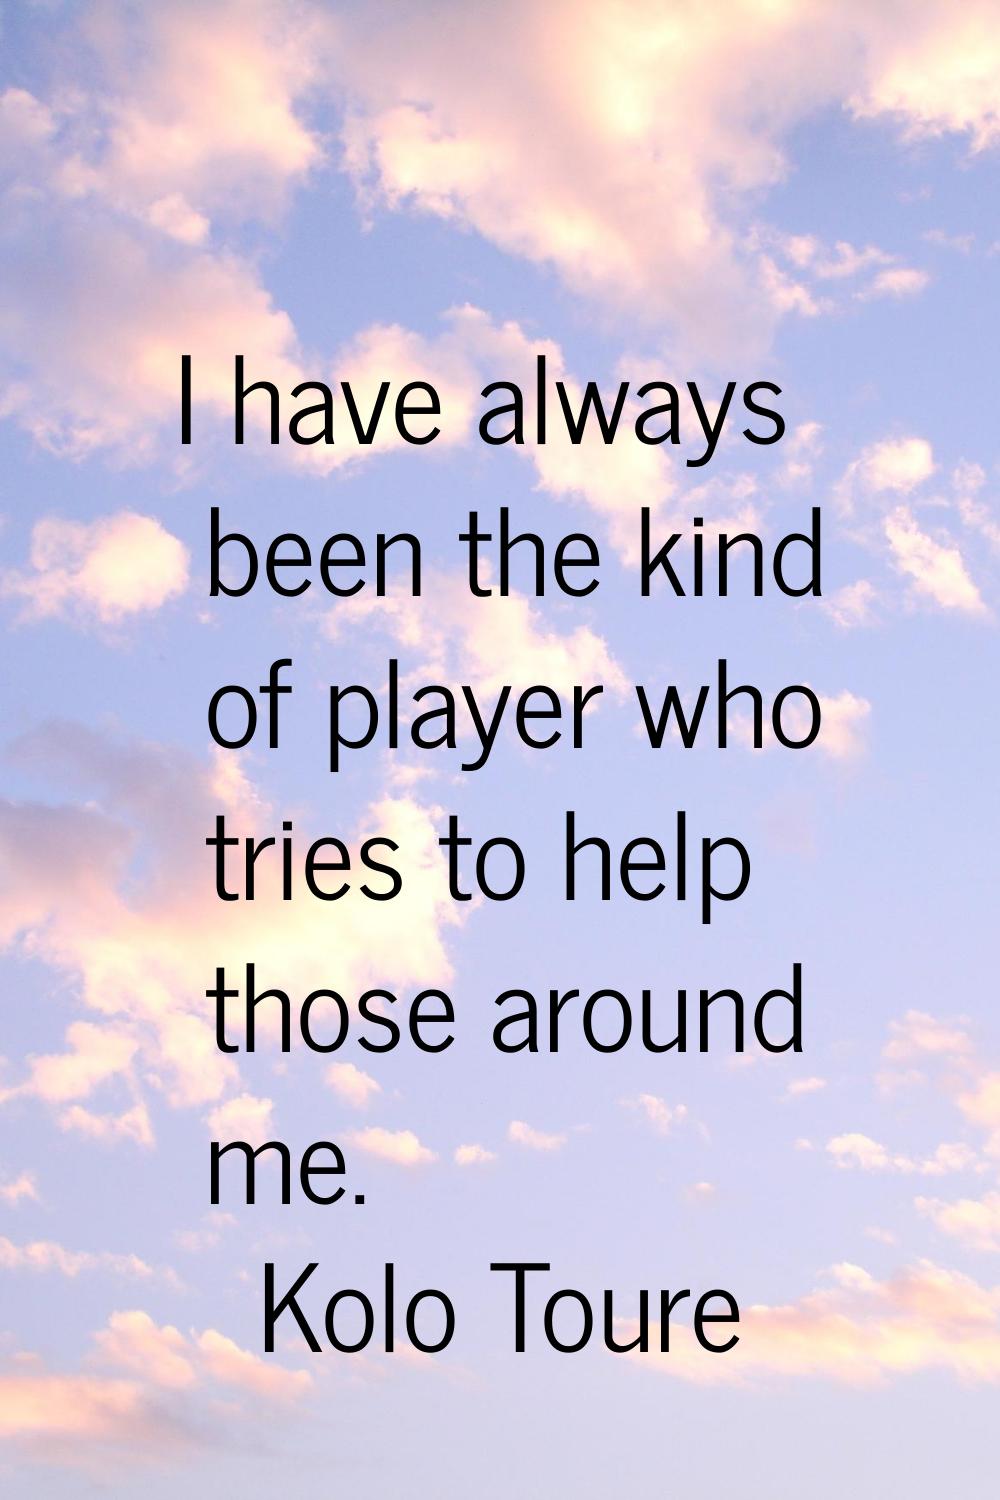 I have always been the kind of player who tries to help those around me.